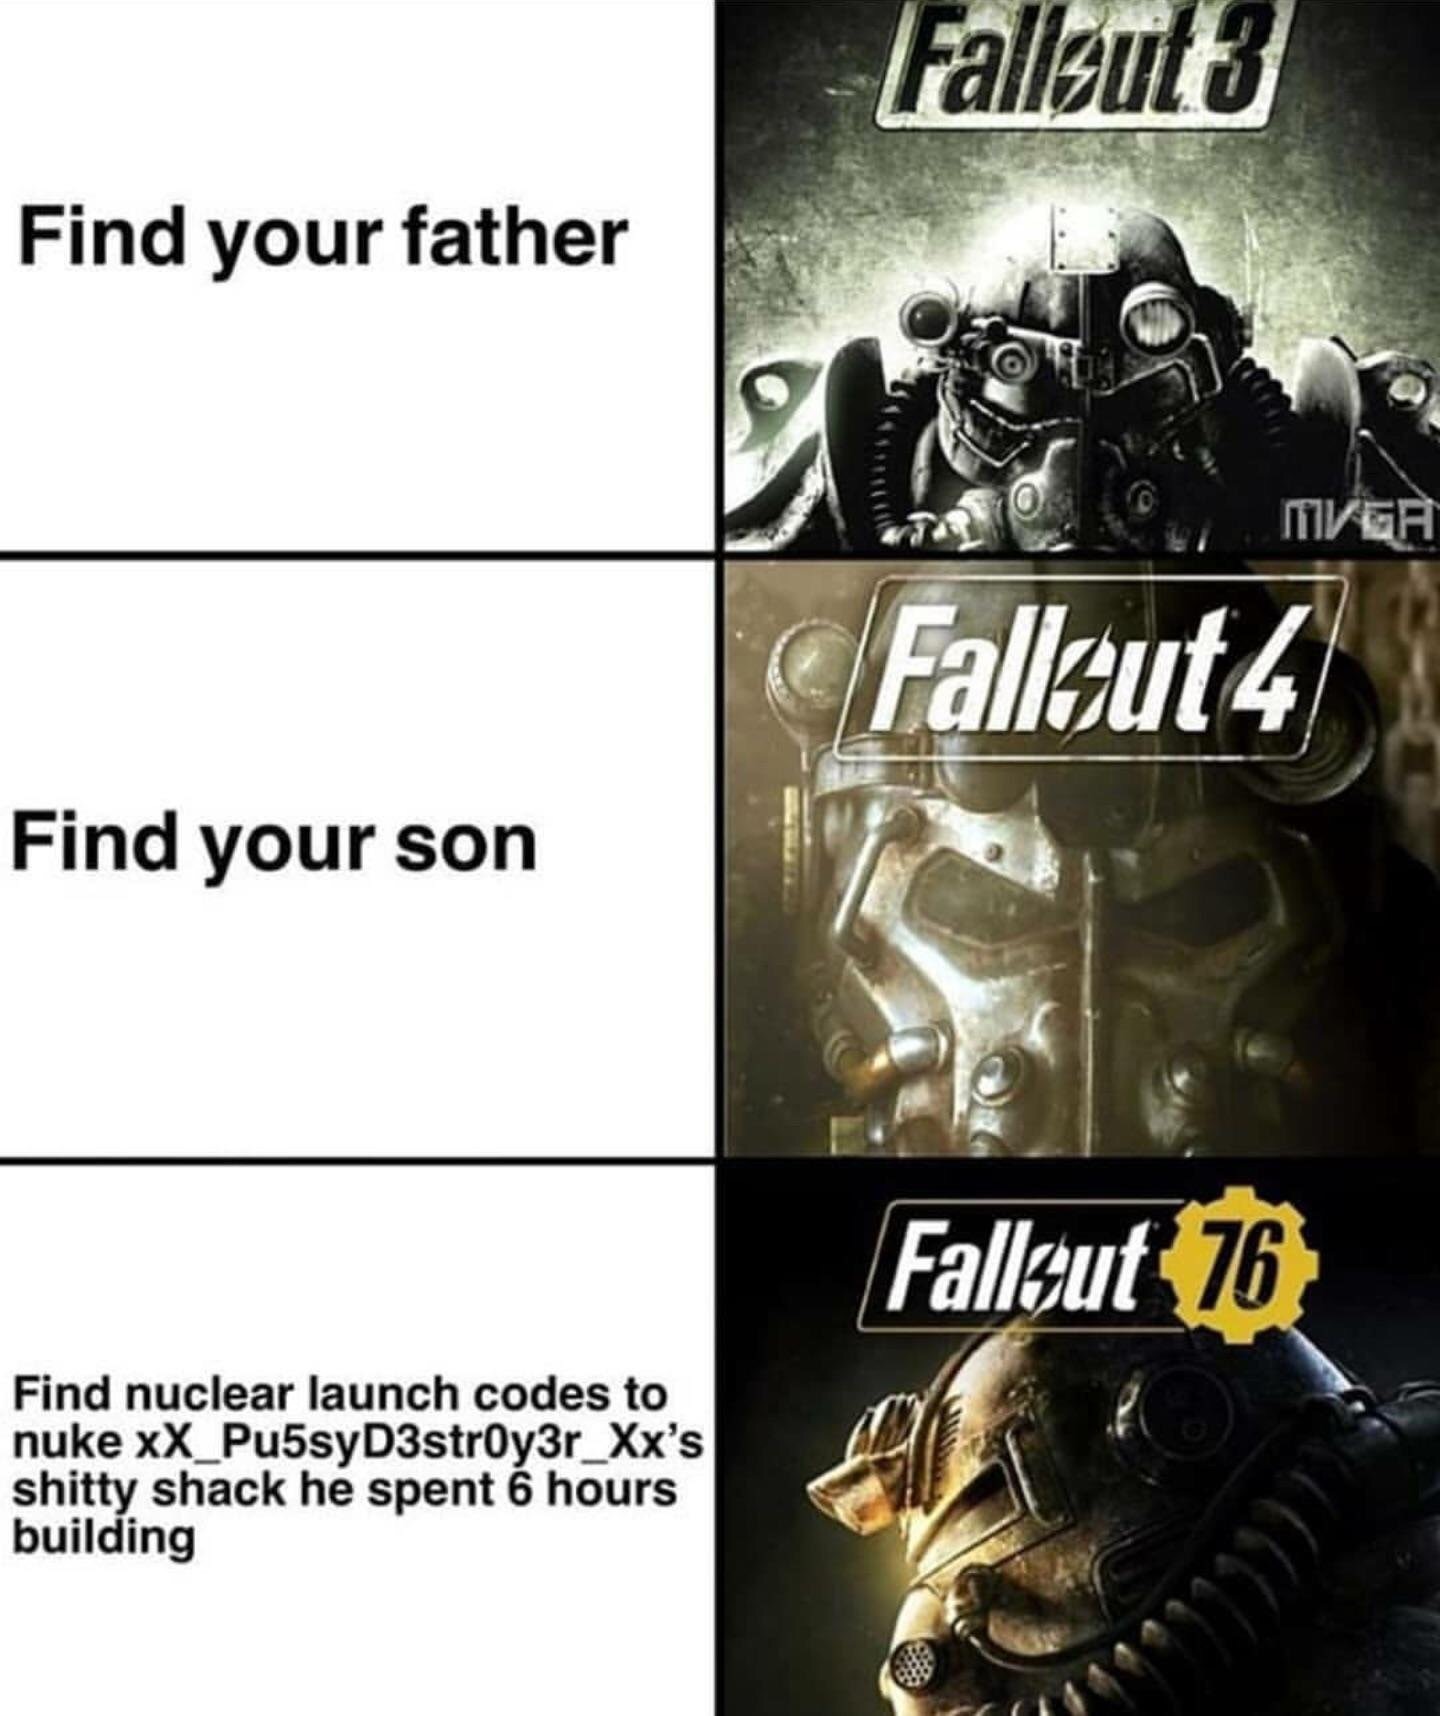 fallout 76 meme - Fallout3 Find your father Mvga Fallout 4 Find your son Fallout 76 Find nuclear launch codes to nuke xX_Pu5syD3stroy3r_Xx's shitty shack he spent 6 hours building